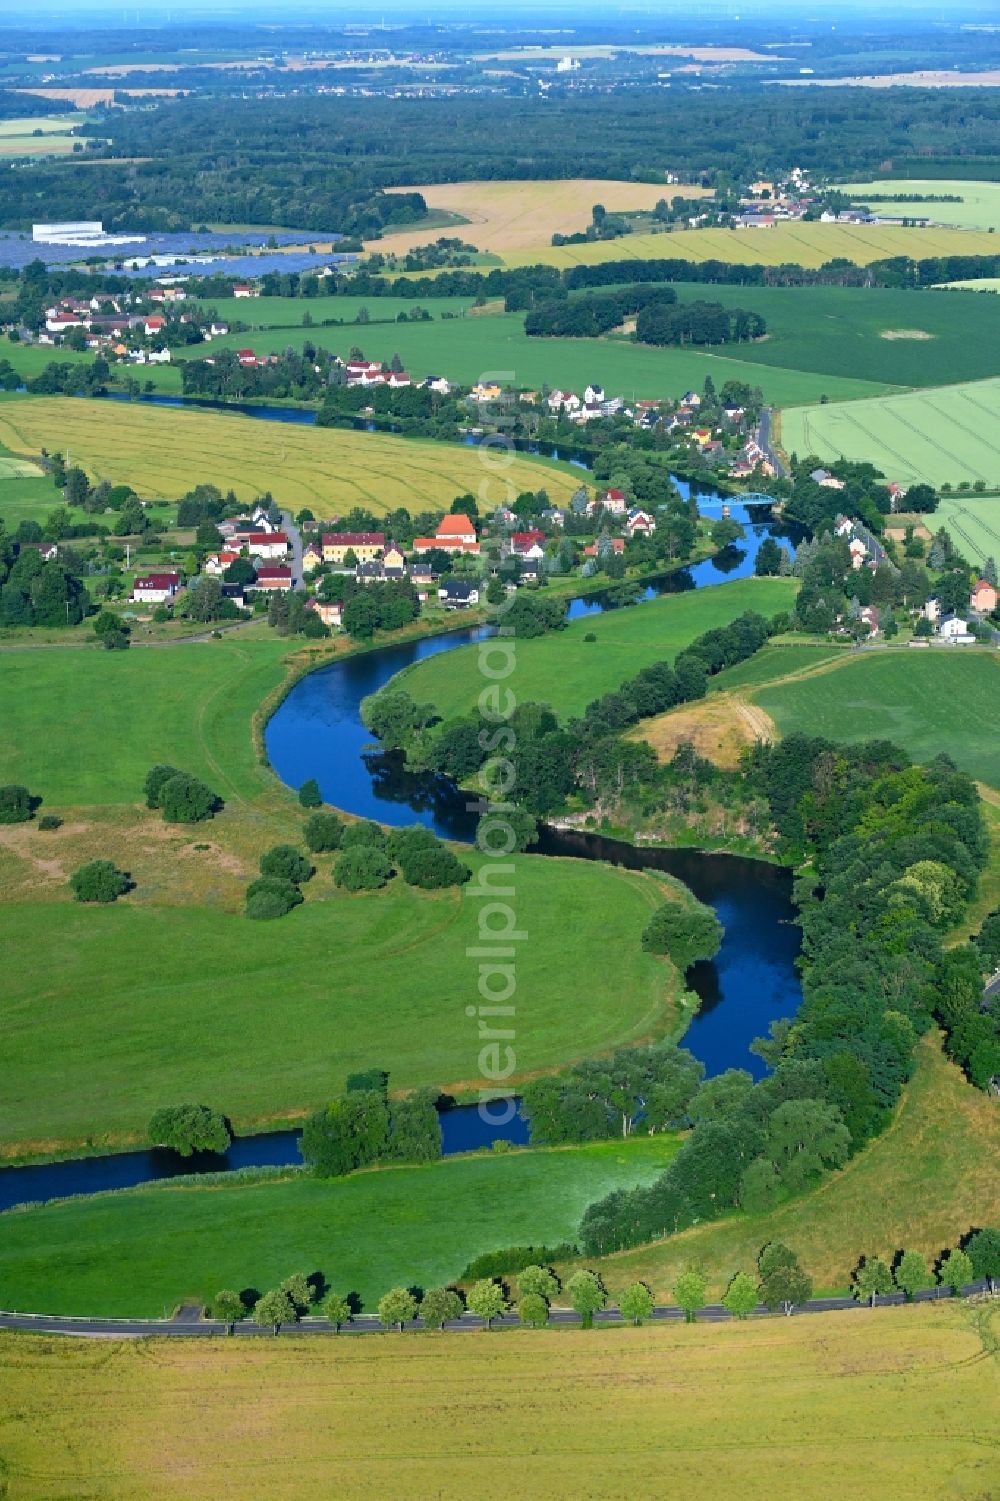 Polkenberg from above - Meandering, serpentine curve of river Freiberger Mulde in Polkenberg in the state Saxony, Germany